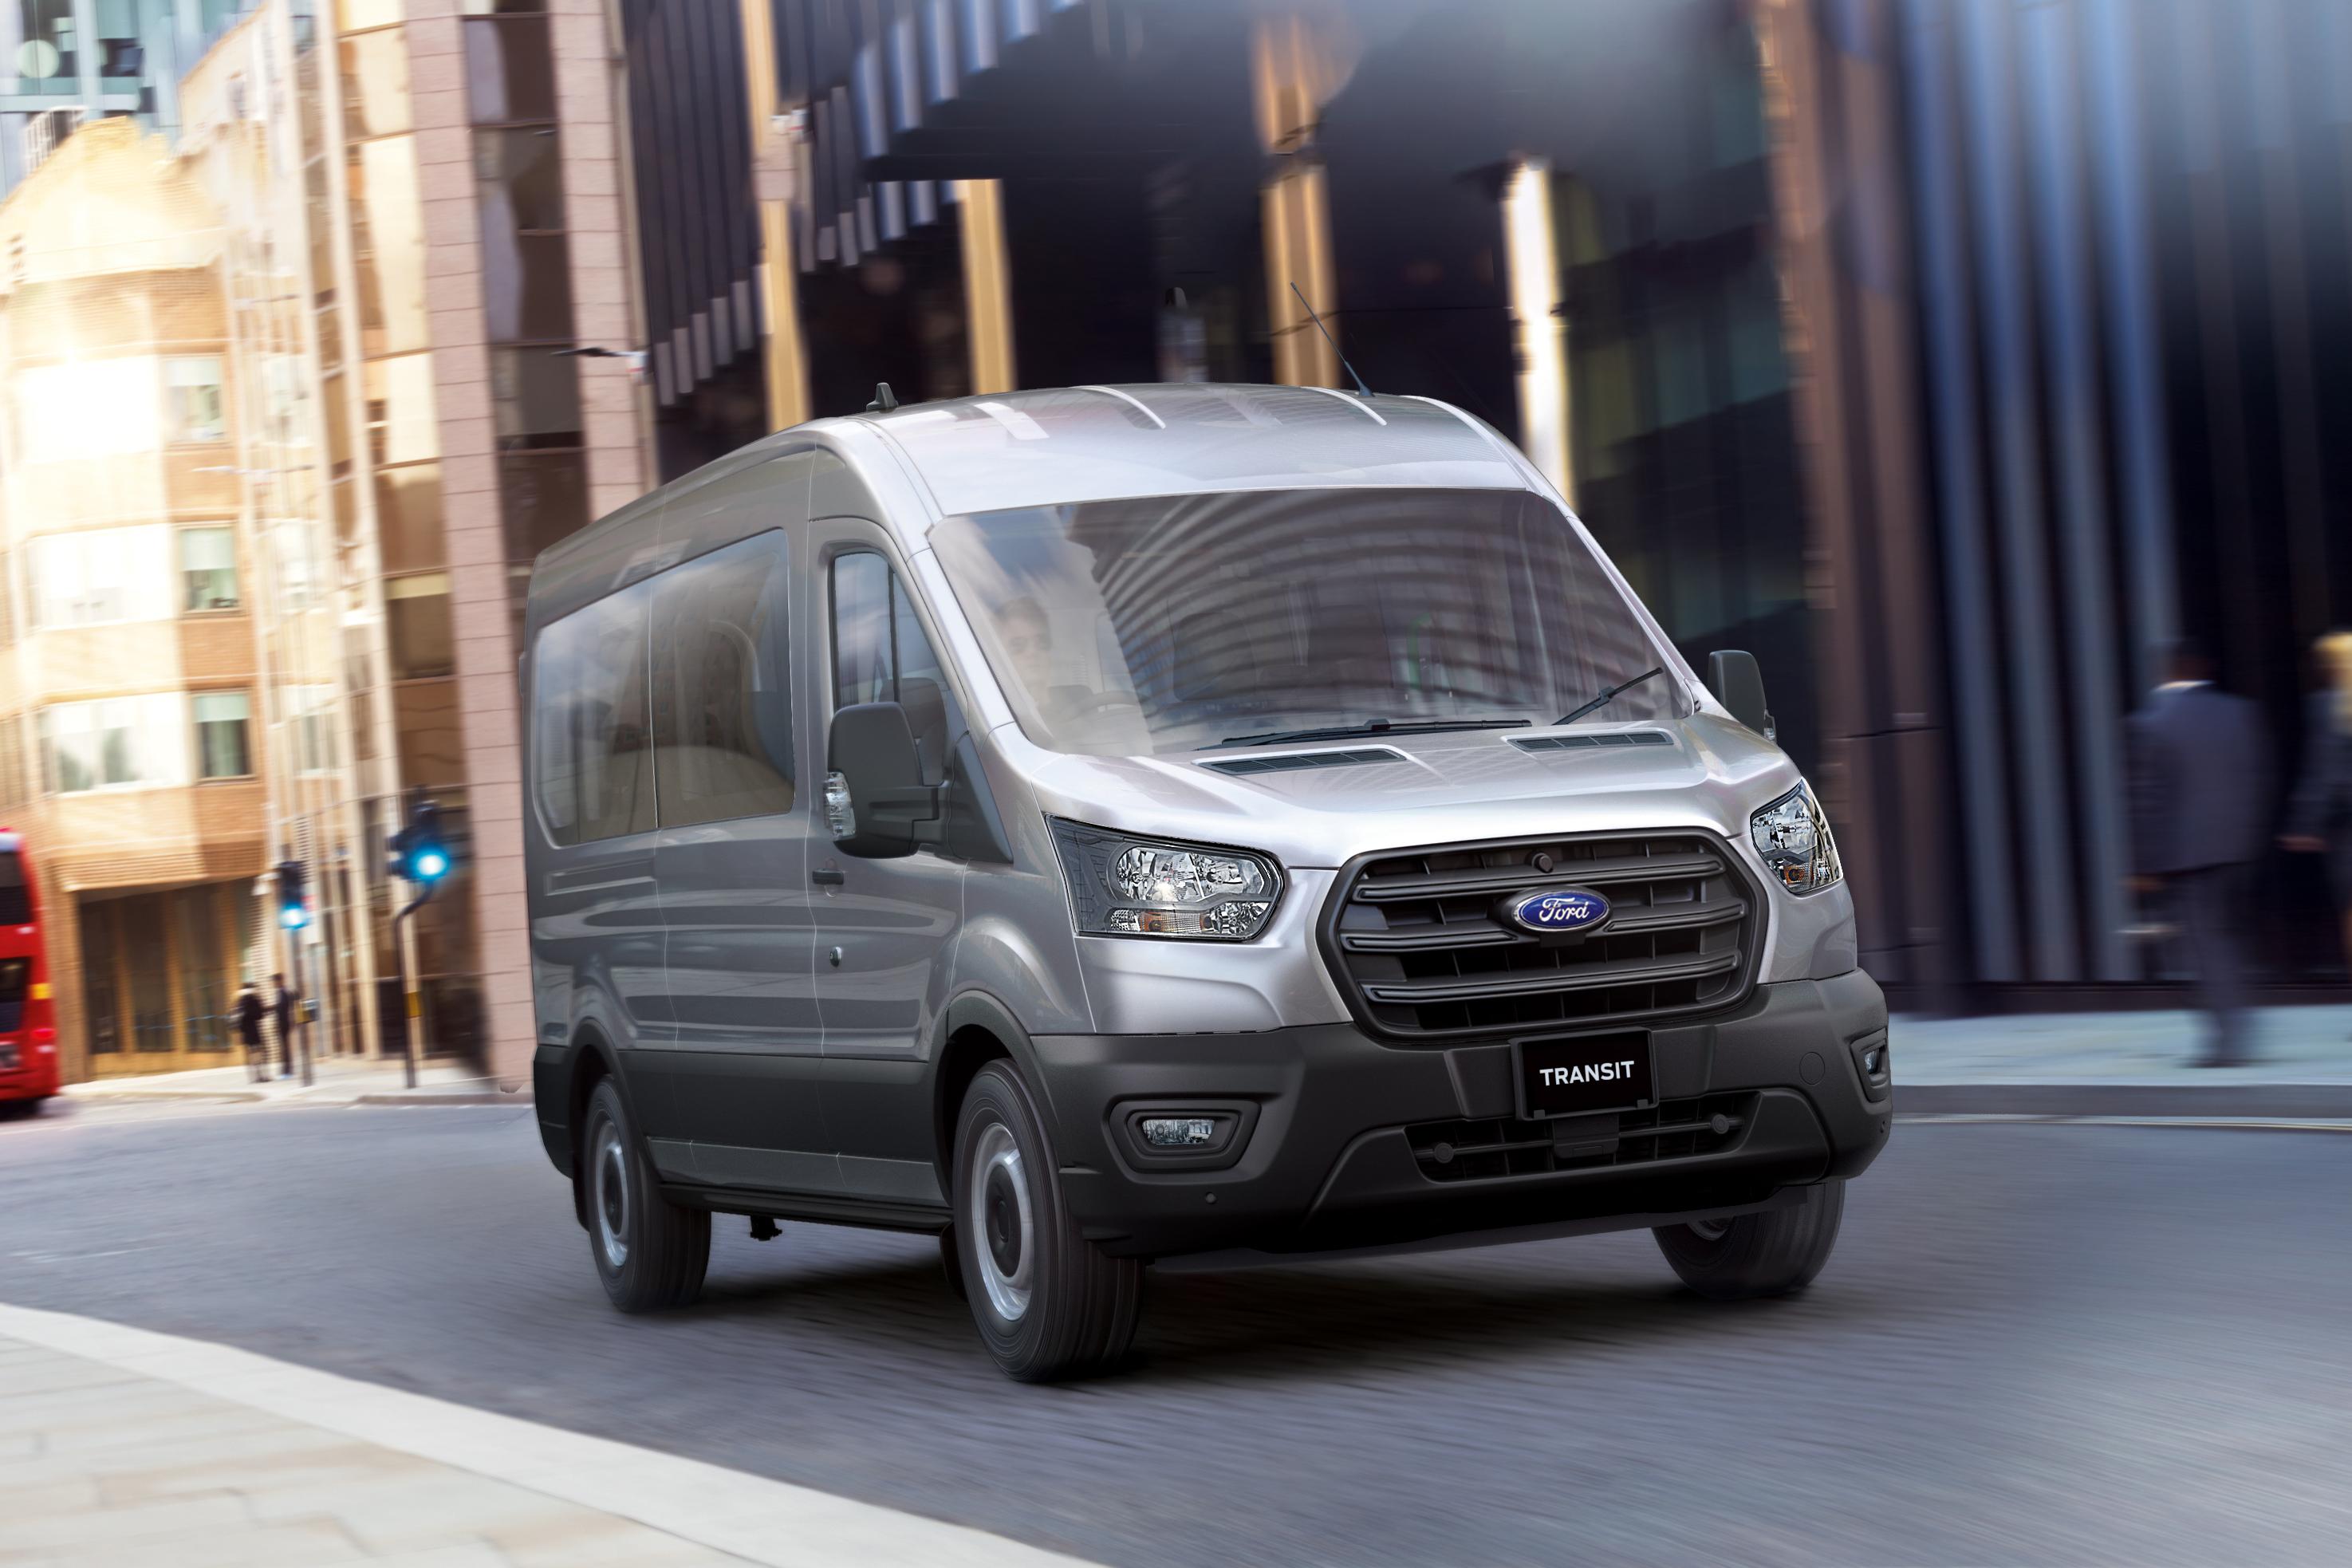 2022 Ford ETransit Begins Testing in Fleets Ahead of Launch